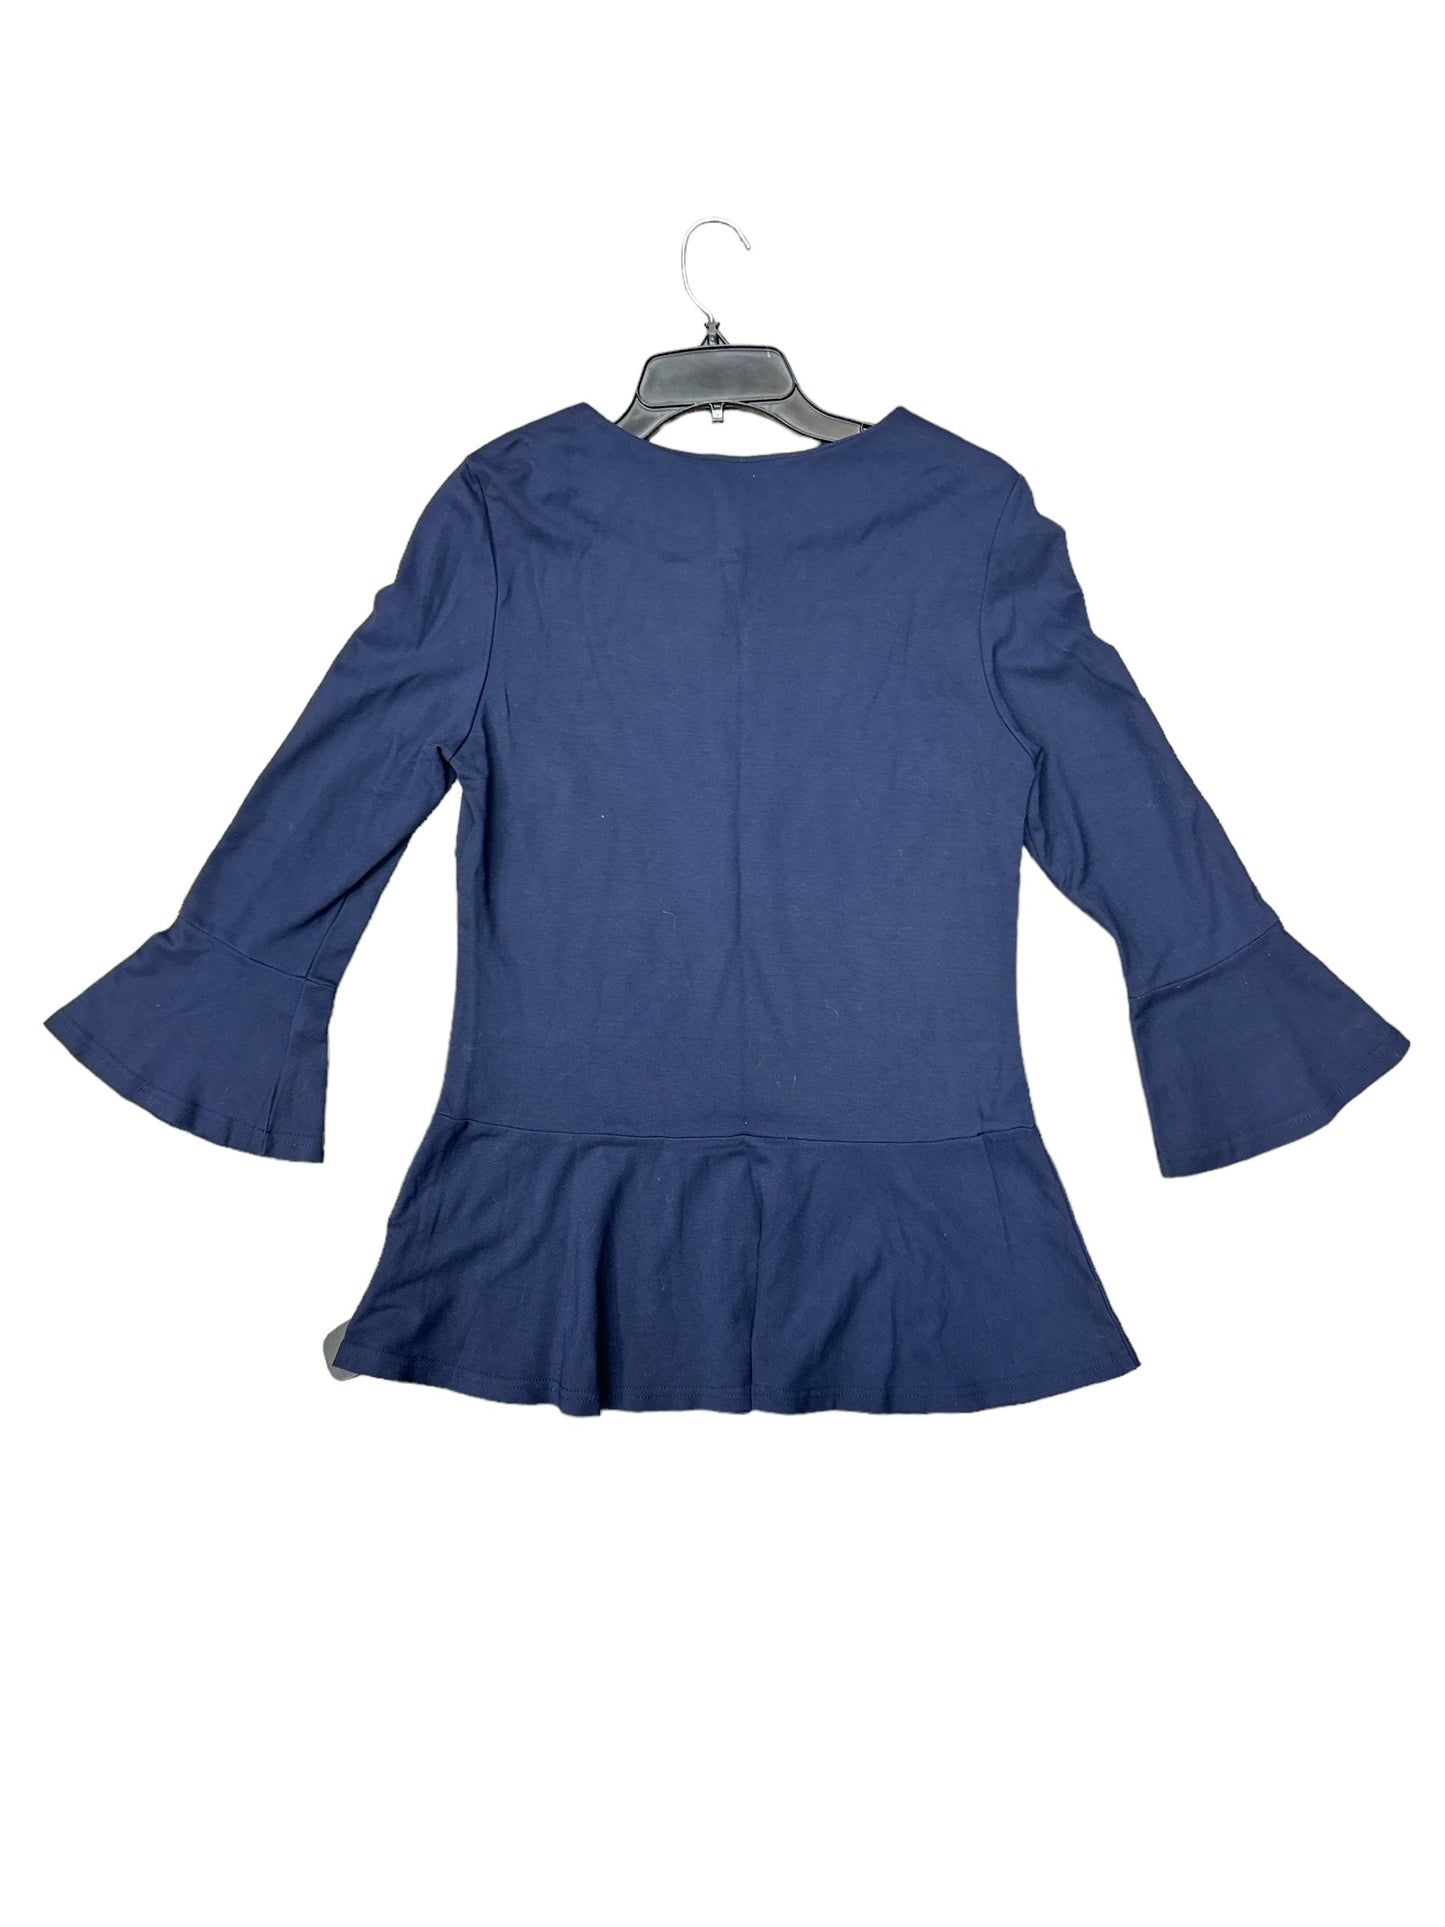 Navy Top Long Sleeve Aryeh, Size M